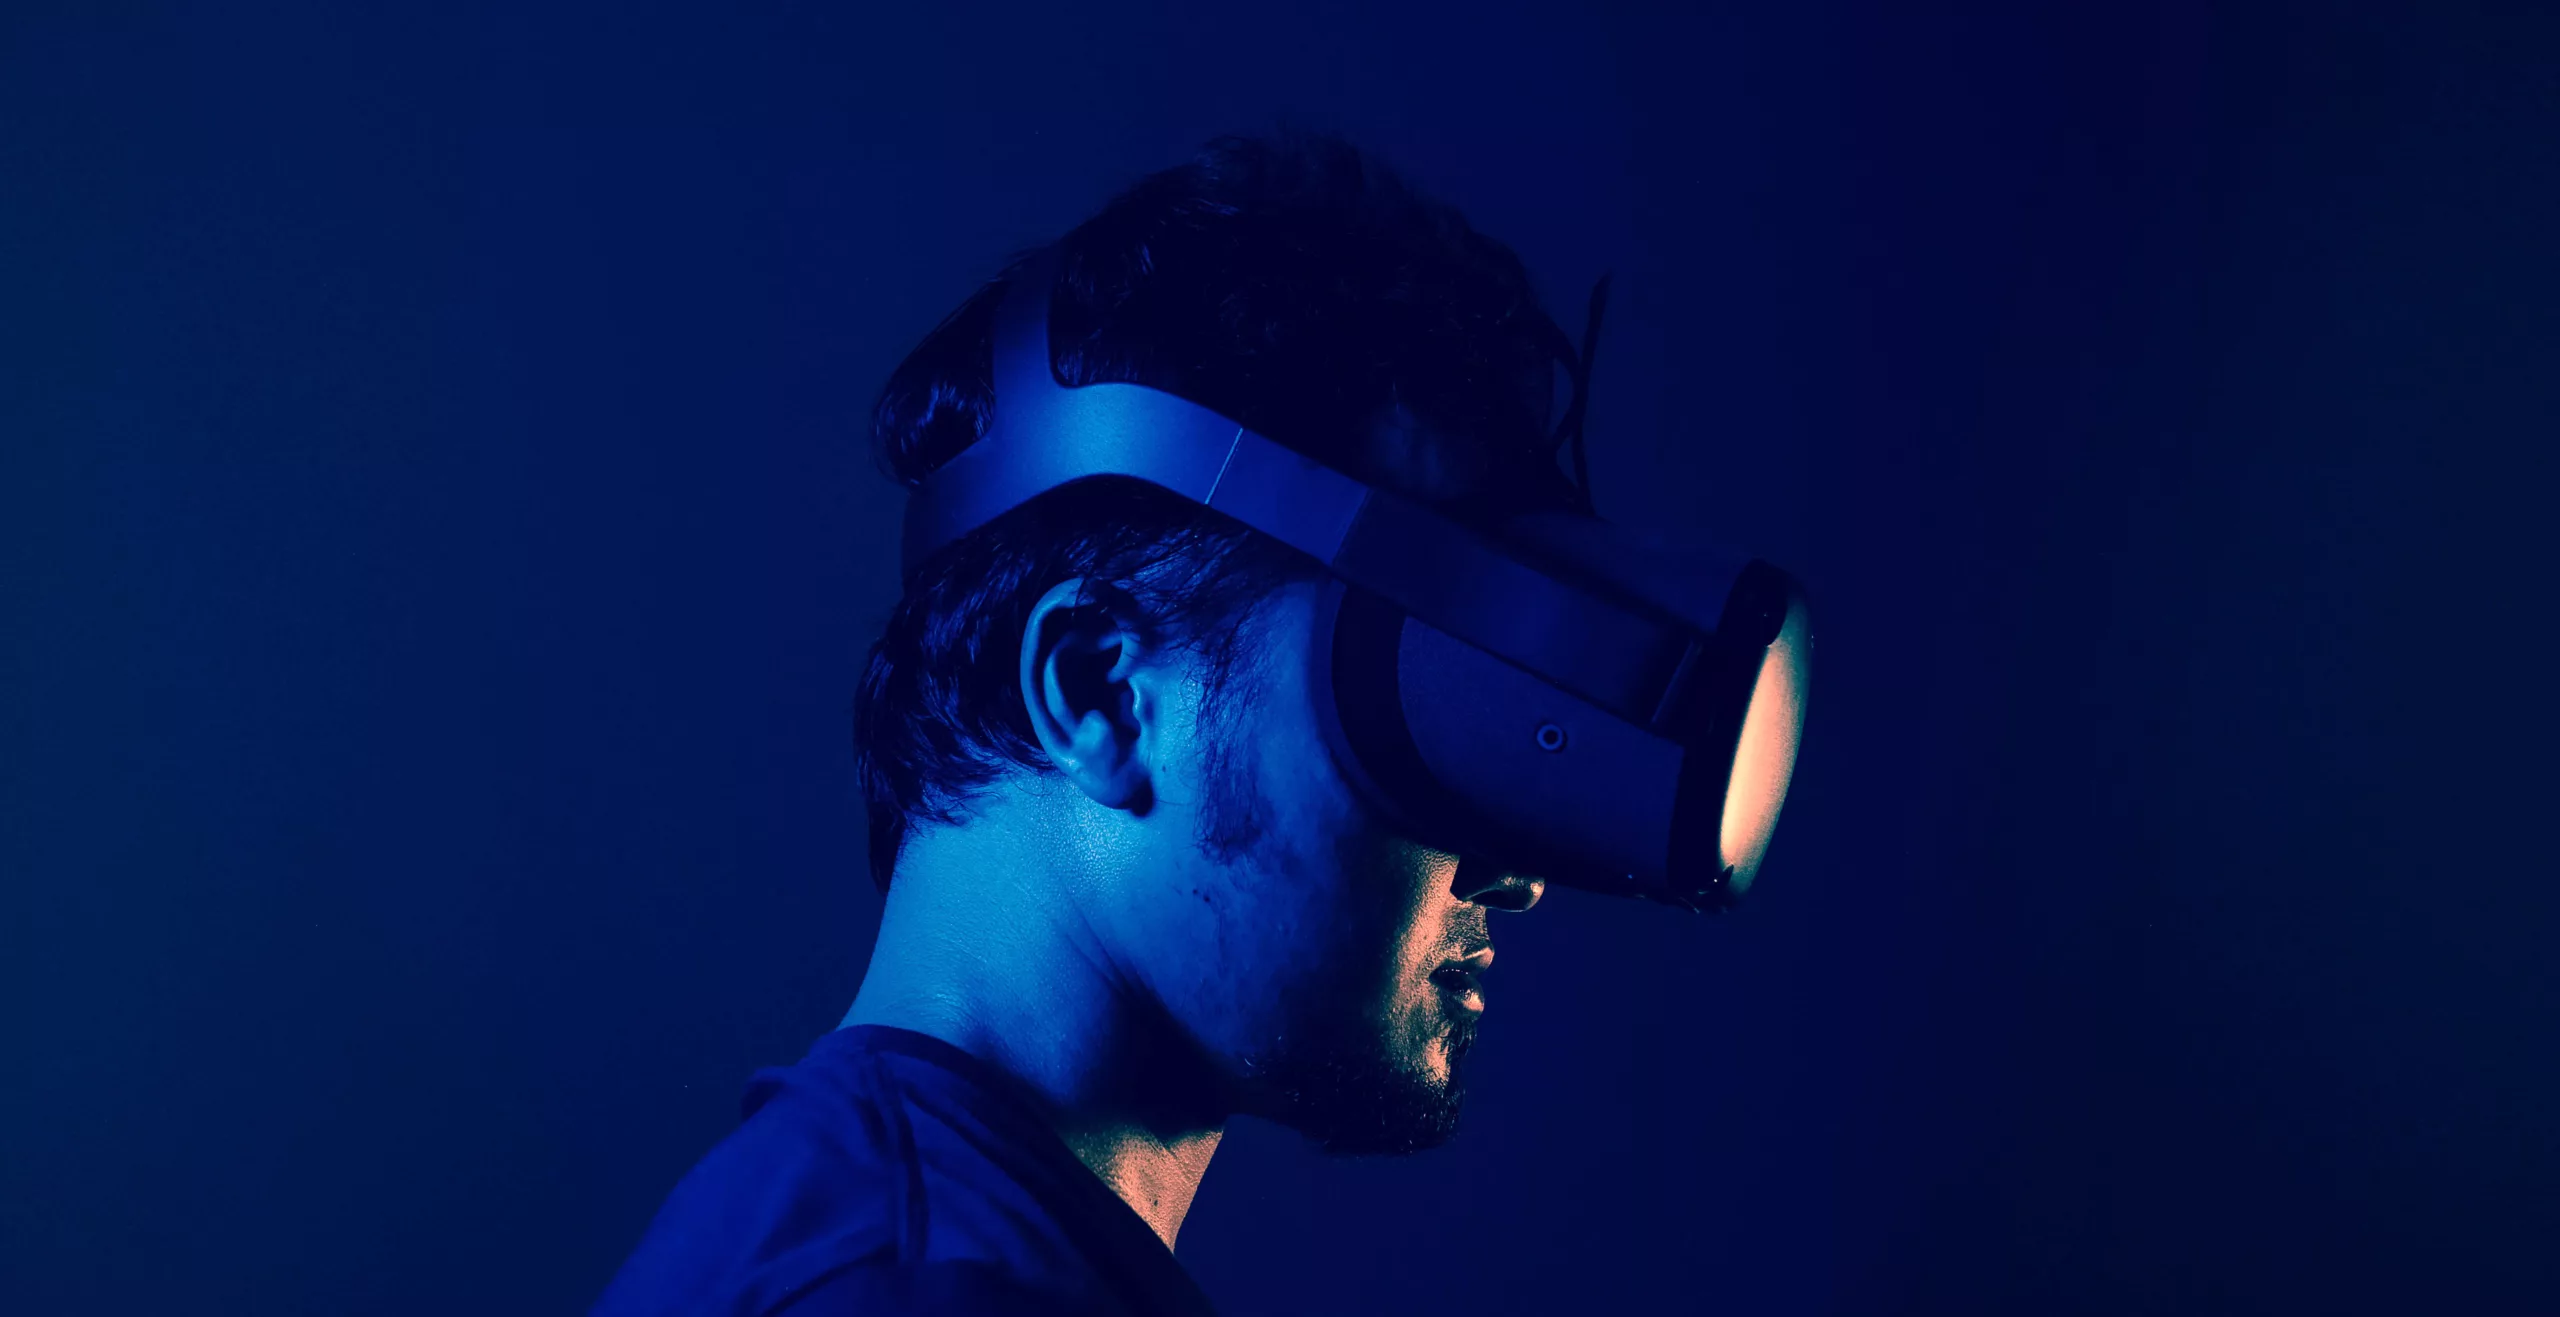 A man using a VR headset in a dark room